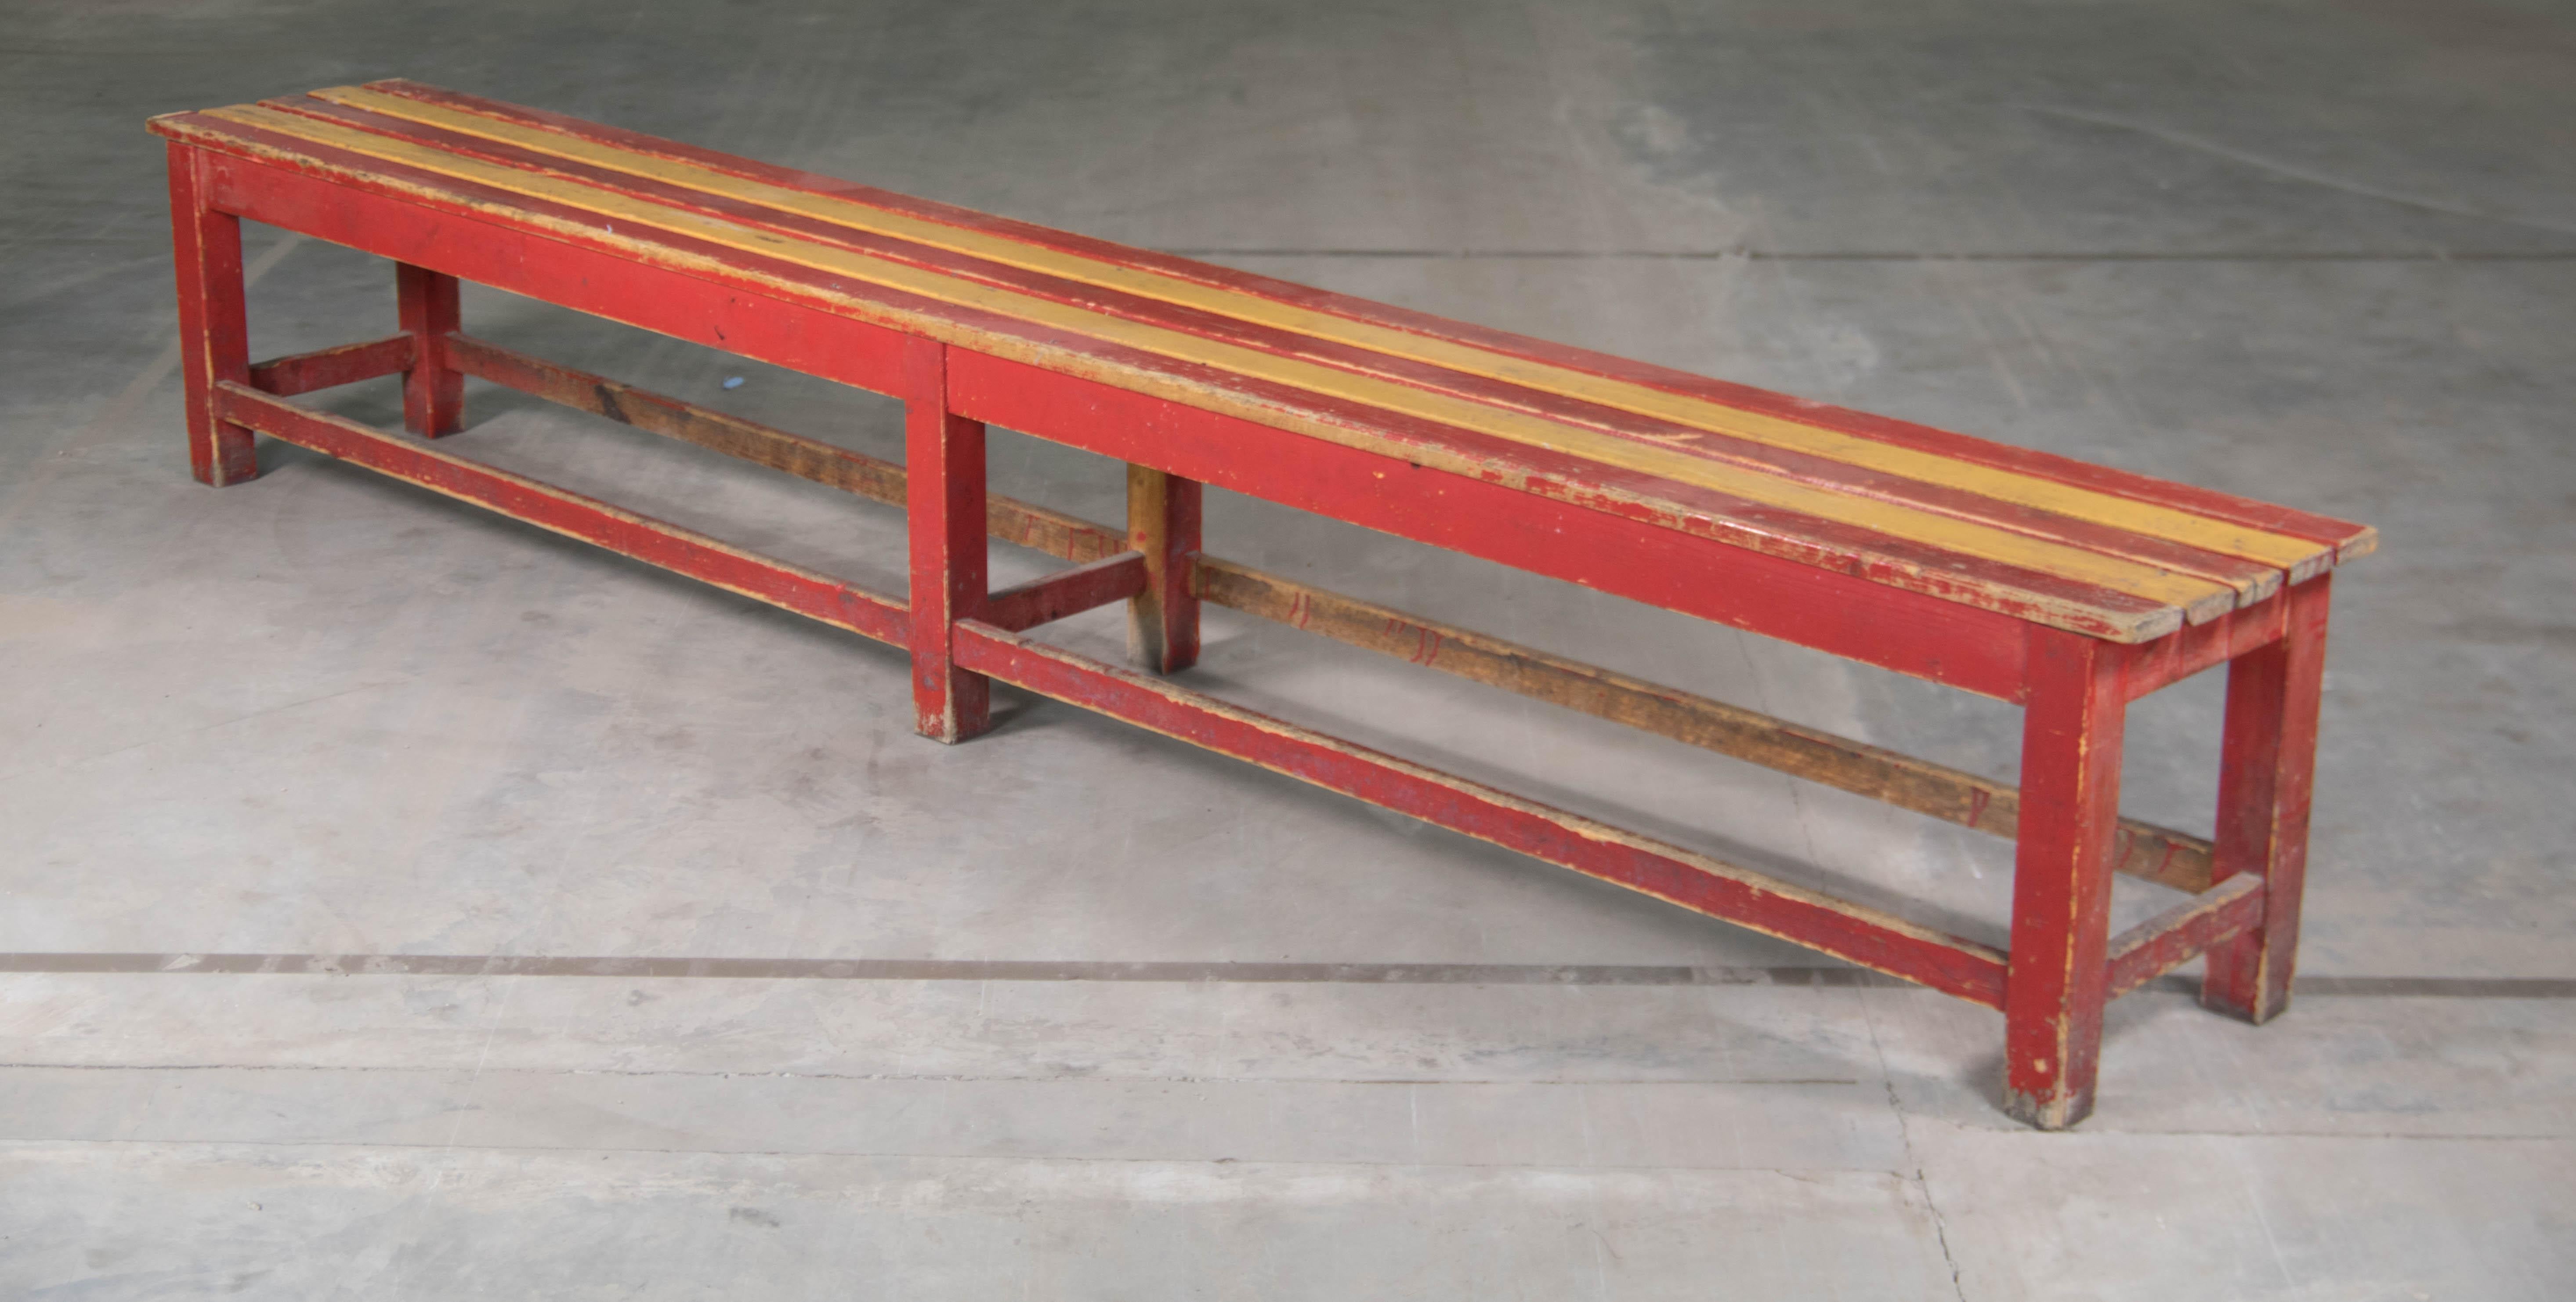 Bench from Bauhaus factory. Original condition with beautiful patina. Sturdy and stabile. 
Shipping to Continental US circa $1000.